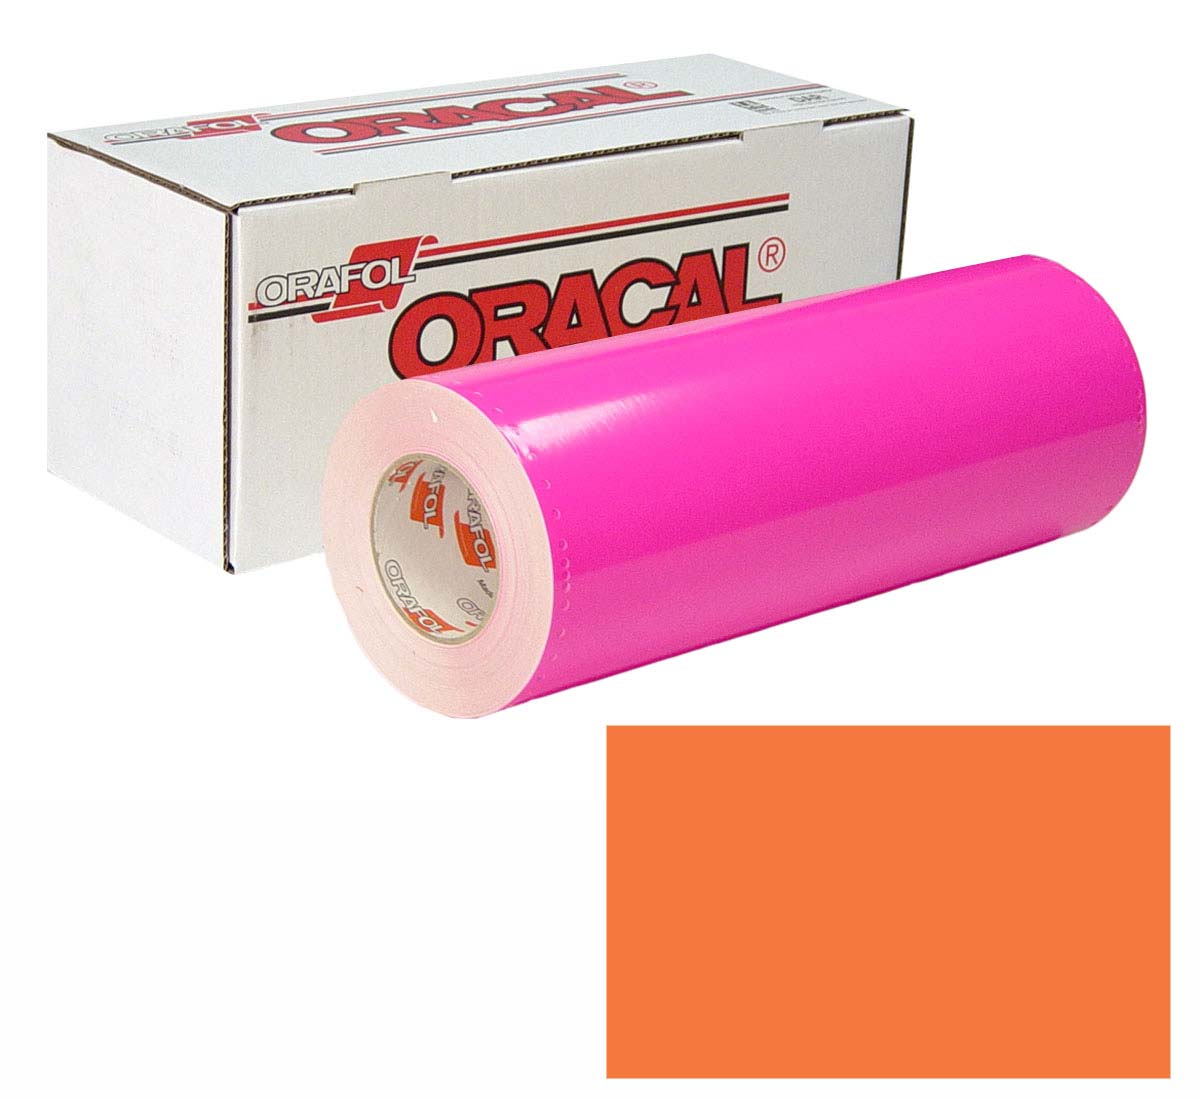 ORACAL 7510 Fluor 15in X 10yd 038 Red Orng